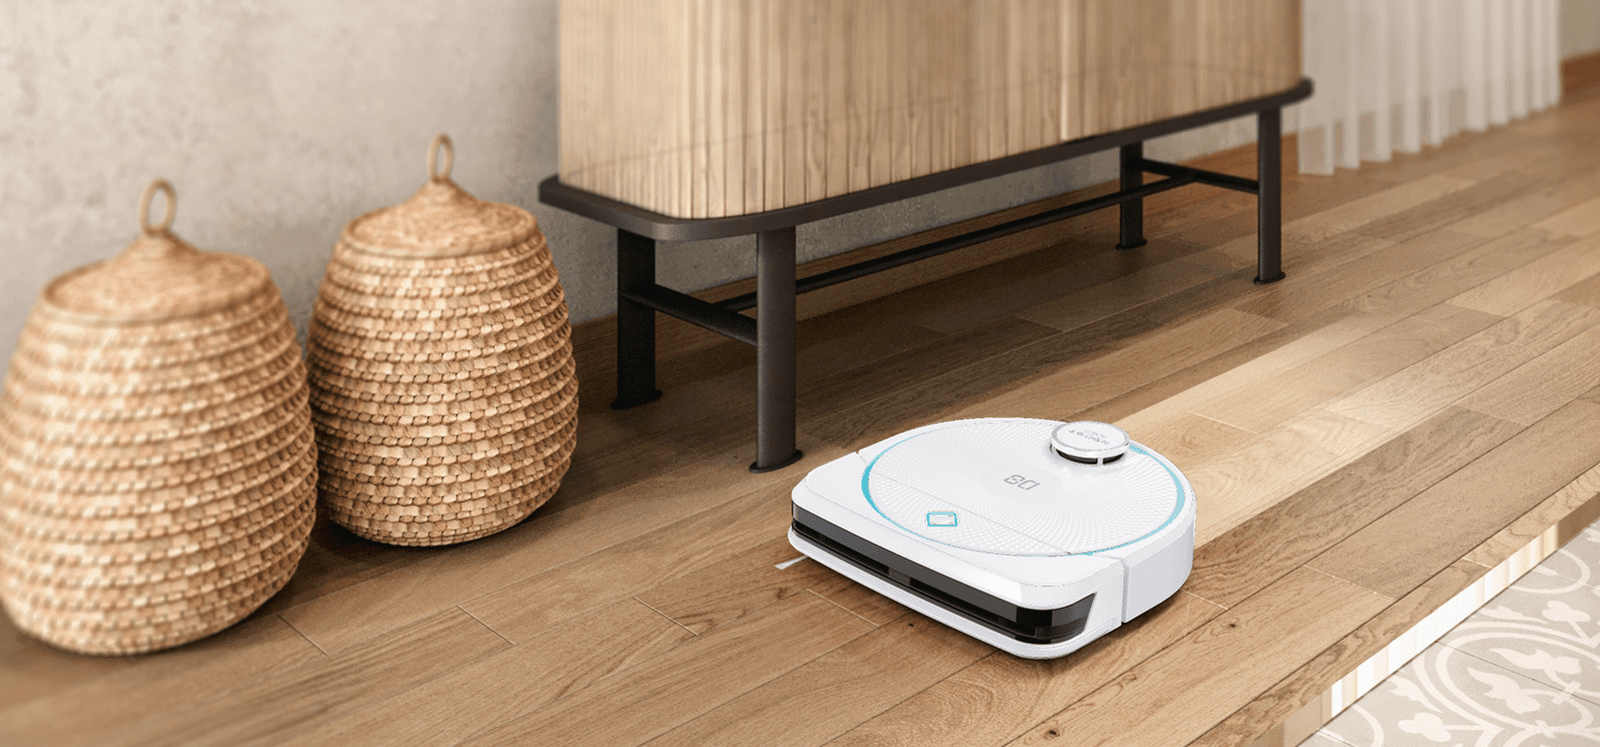 Transform Apartment Living with the Hobot Legee D8 Robot Vacuum - Solenco South Africa